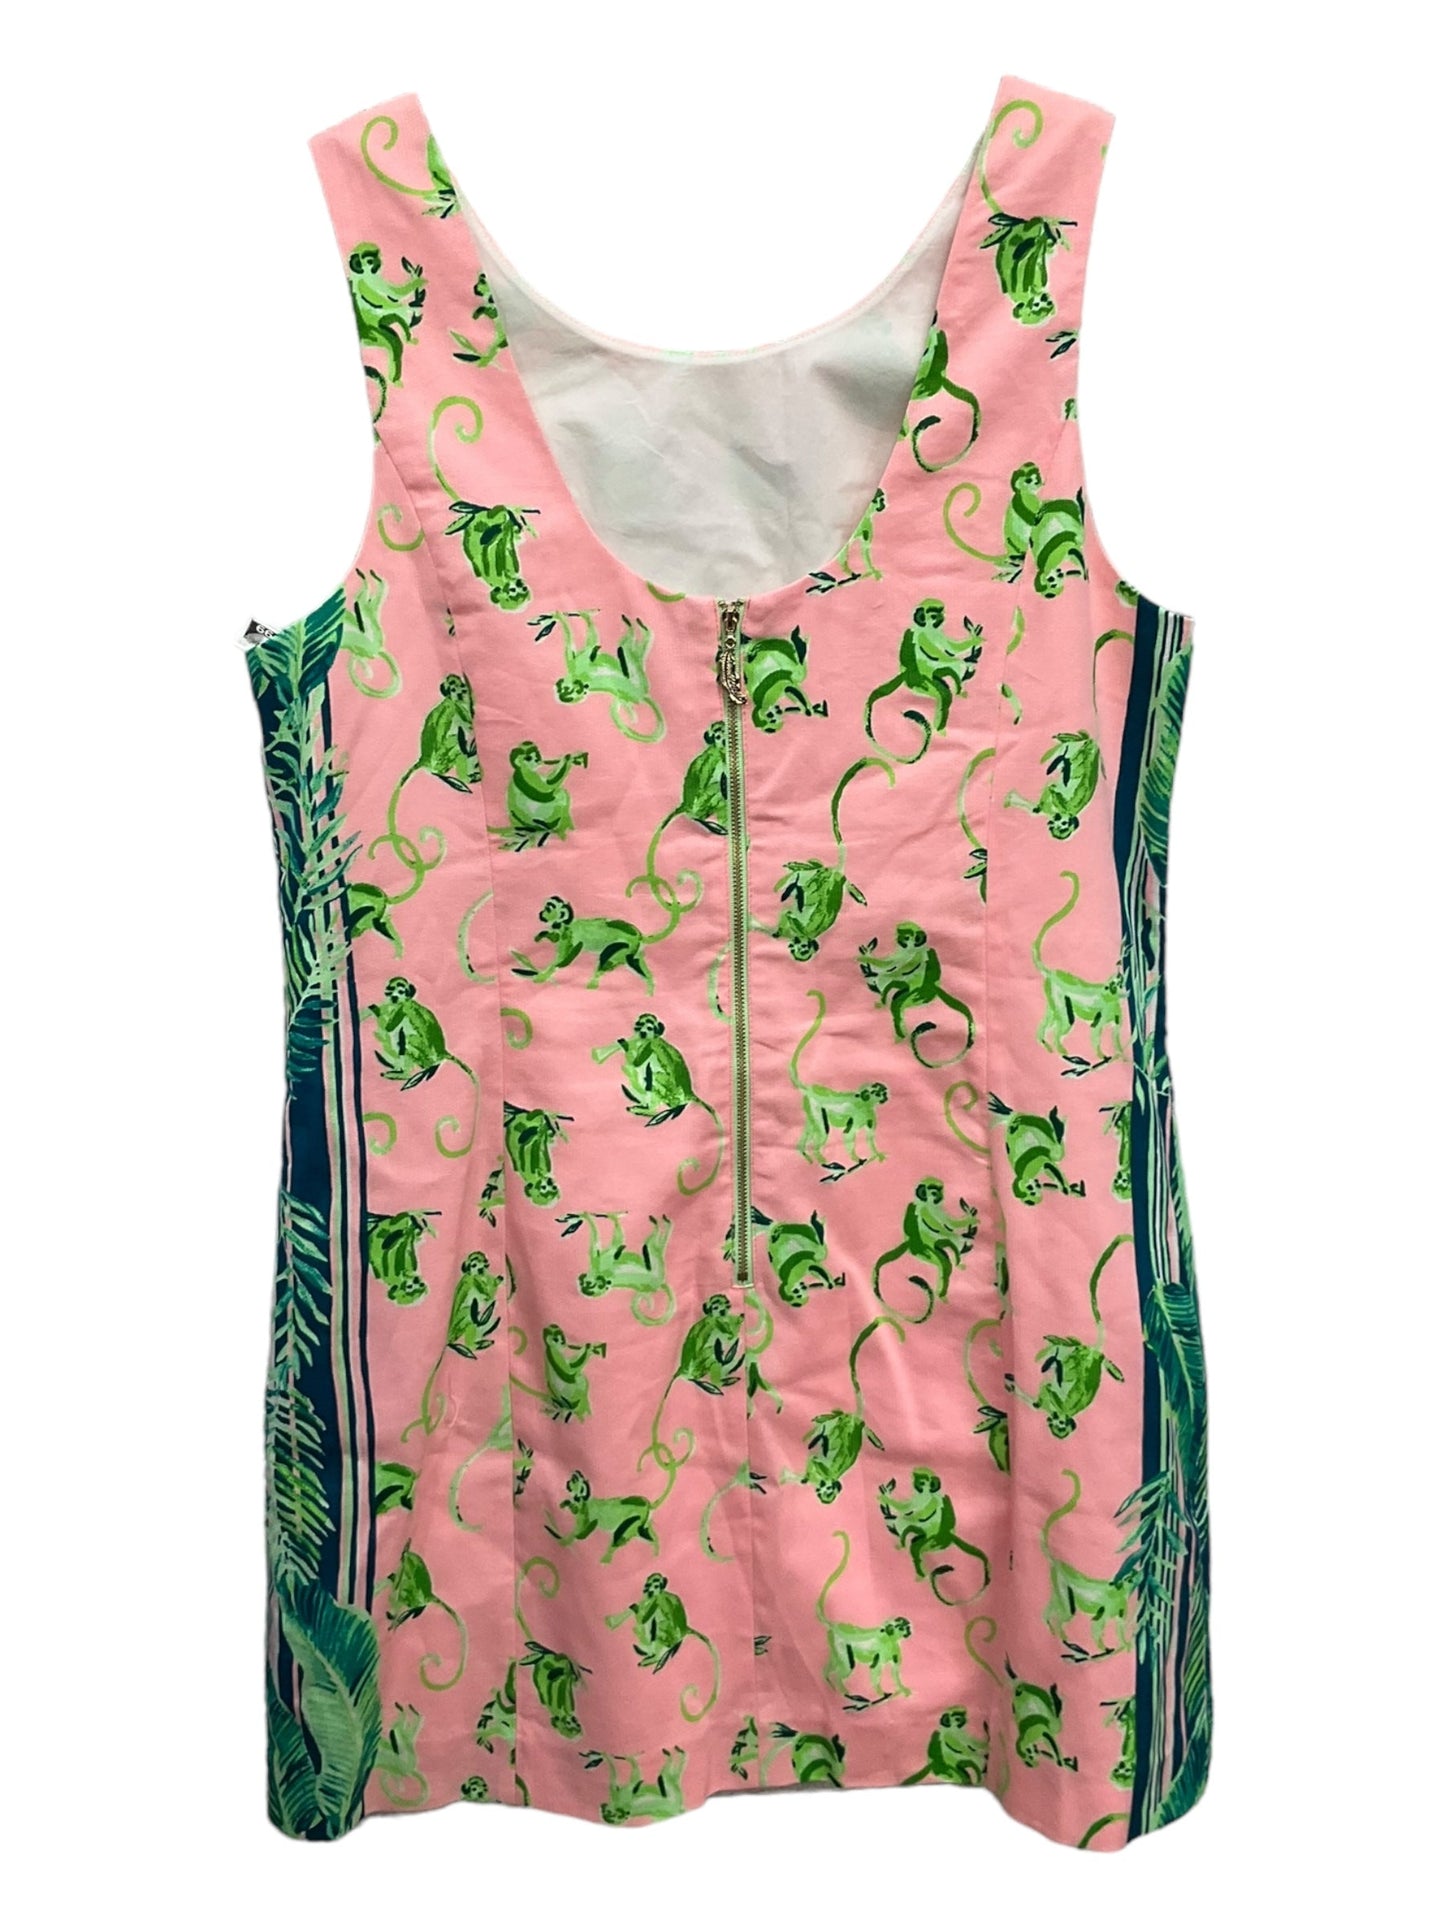 Green & Pink Dress Casual Short Lilly Pulitzer, Size 16